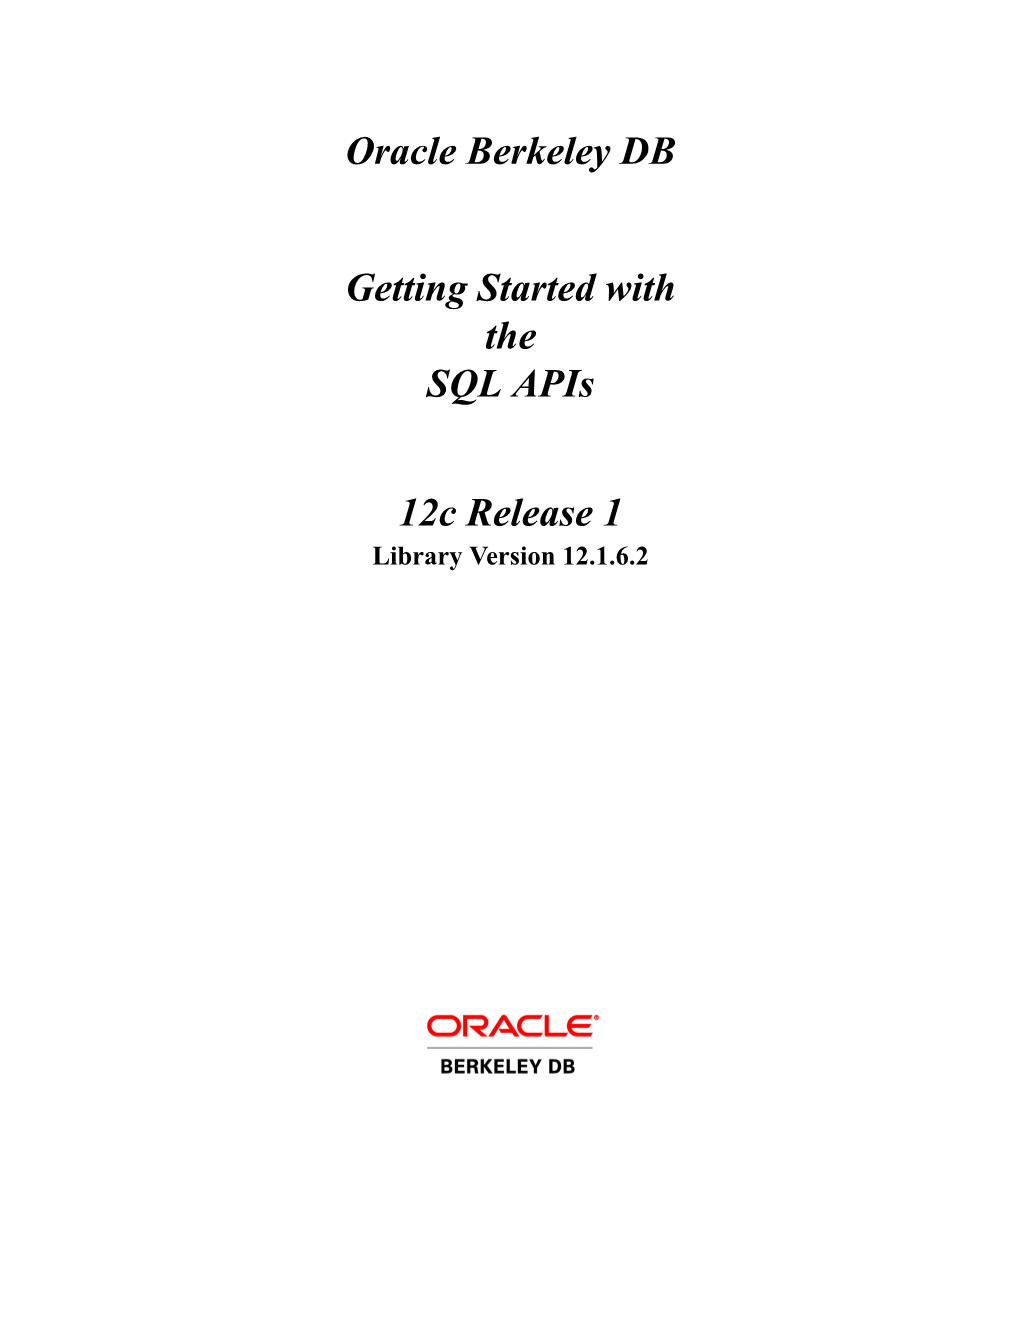 Oracle Berkeley DB Getting Started with the SQL Apis 12C Release 1